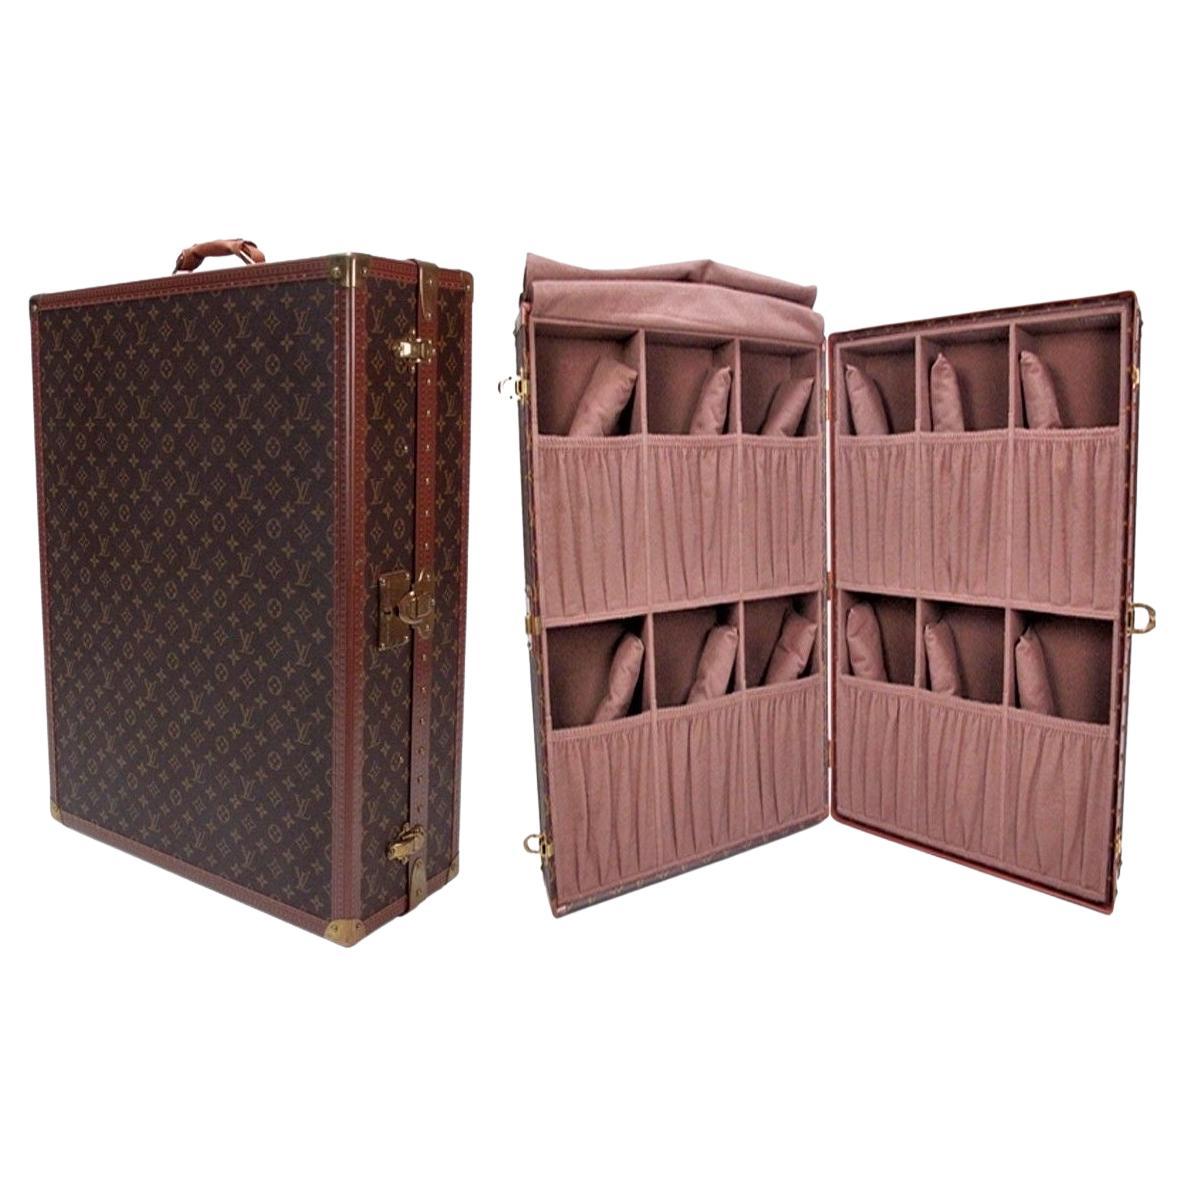 Sold at Auction: A RARE LOUIS VUITTON SHOE TRUNK WITH FITTED INTERIOR